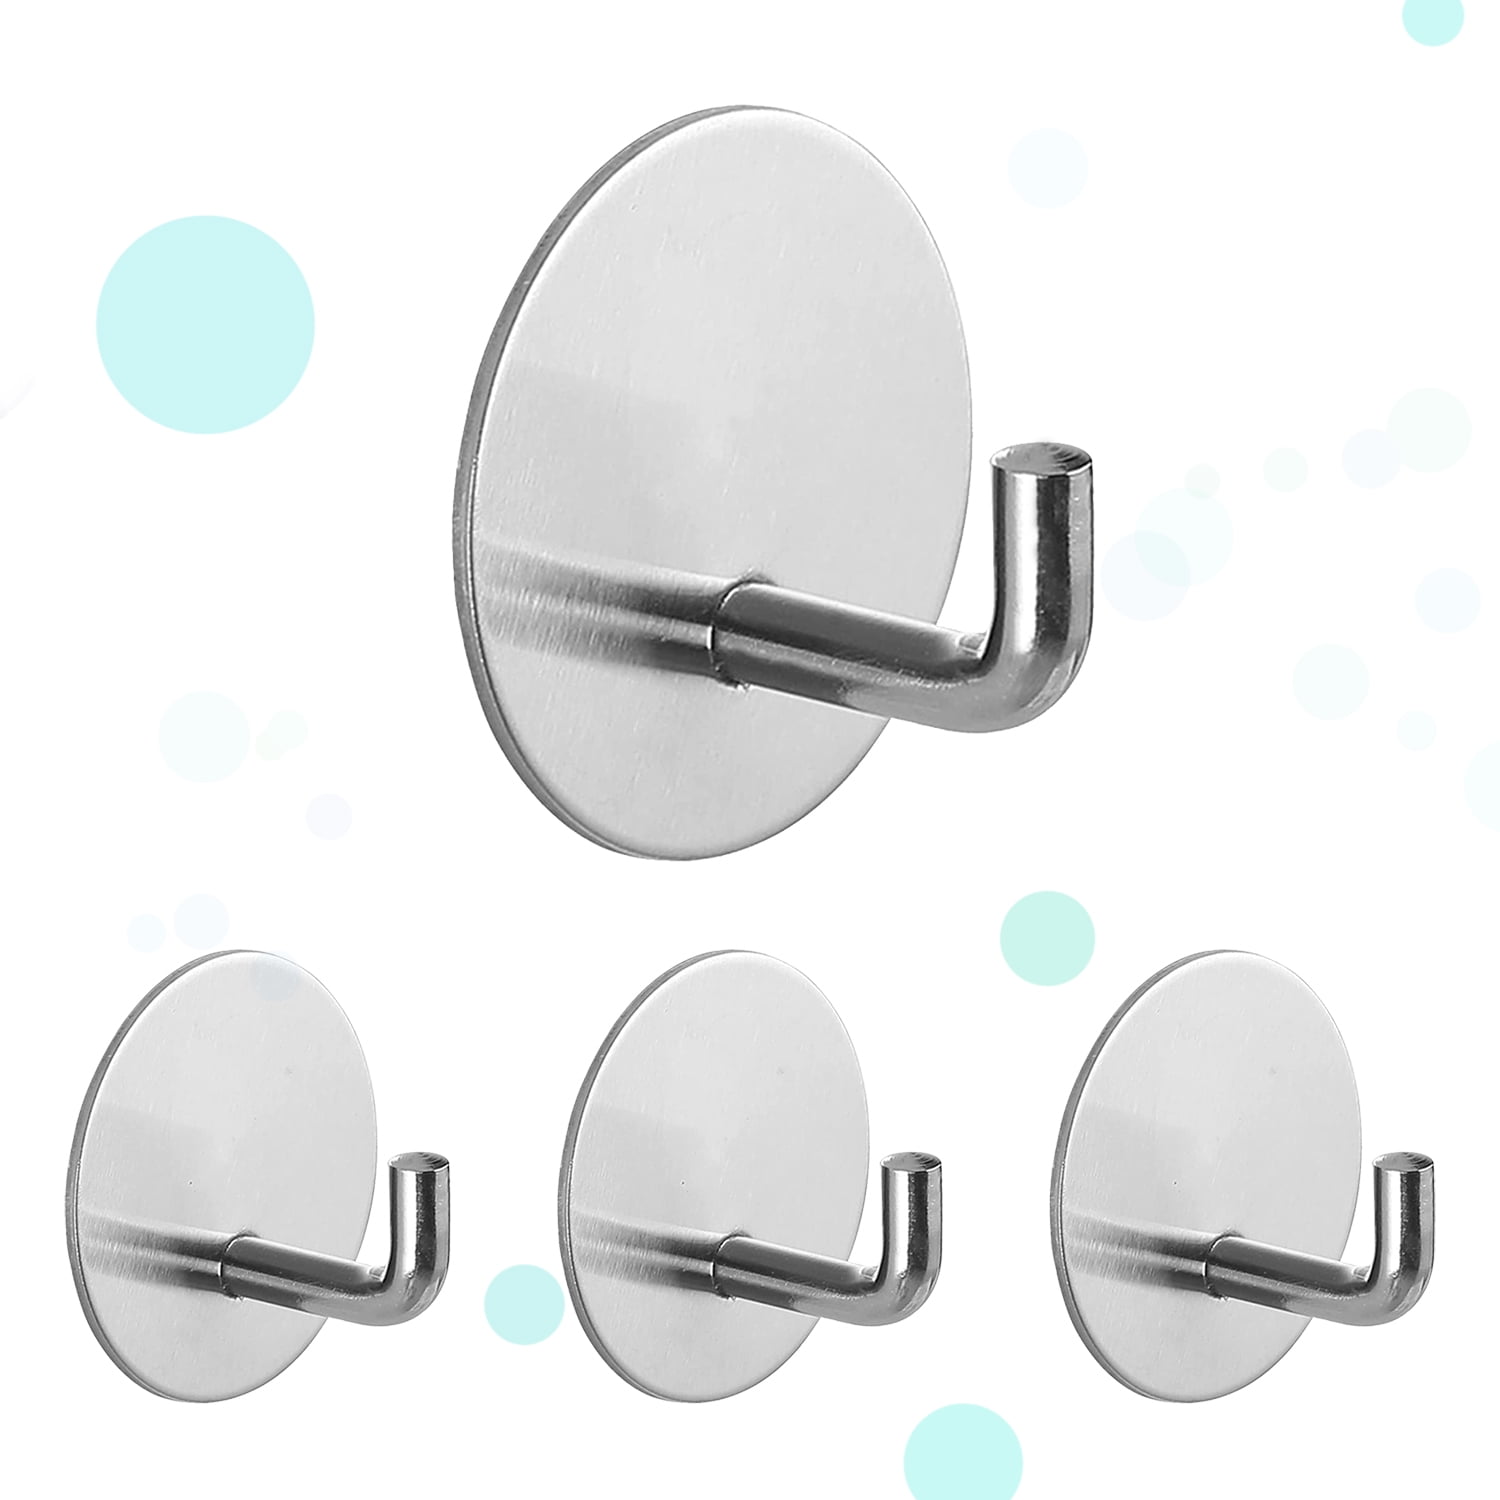 4pcs Holder Hanger Stand For Shower, Stainless Steel Utility Hooks For  Towel, Loofah, Robe And Coat, Bathroom Kitchen Organizer, Self Adhesive,  Waterp